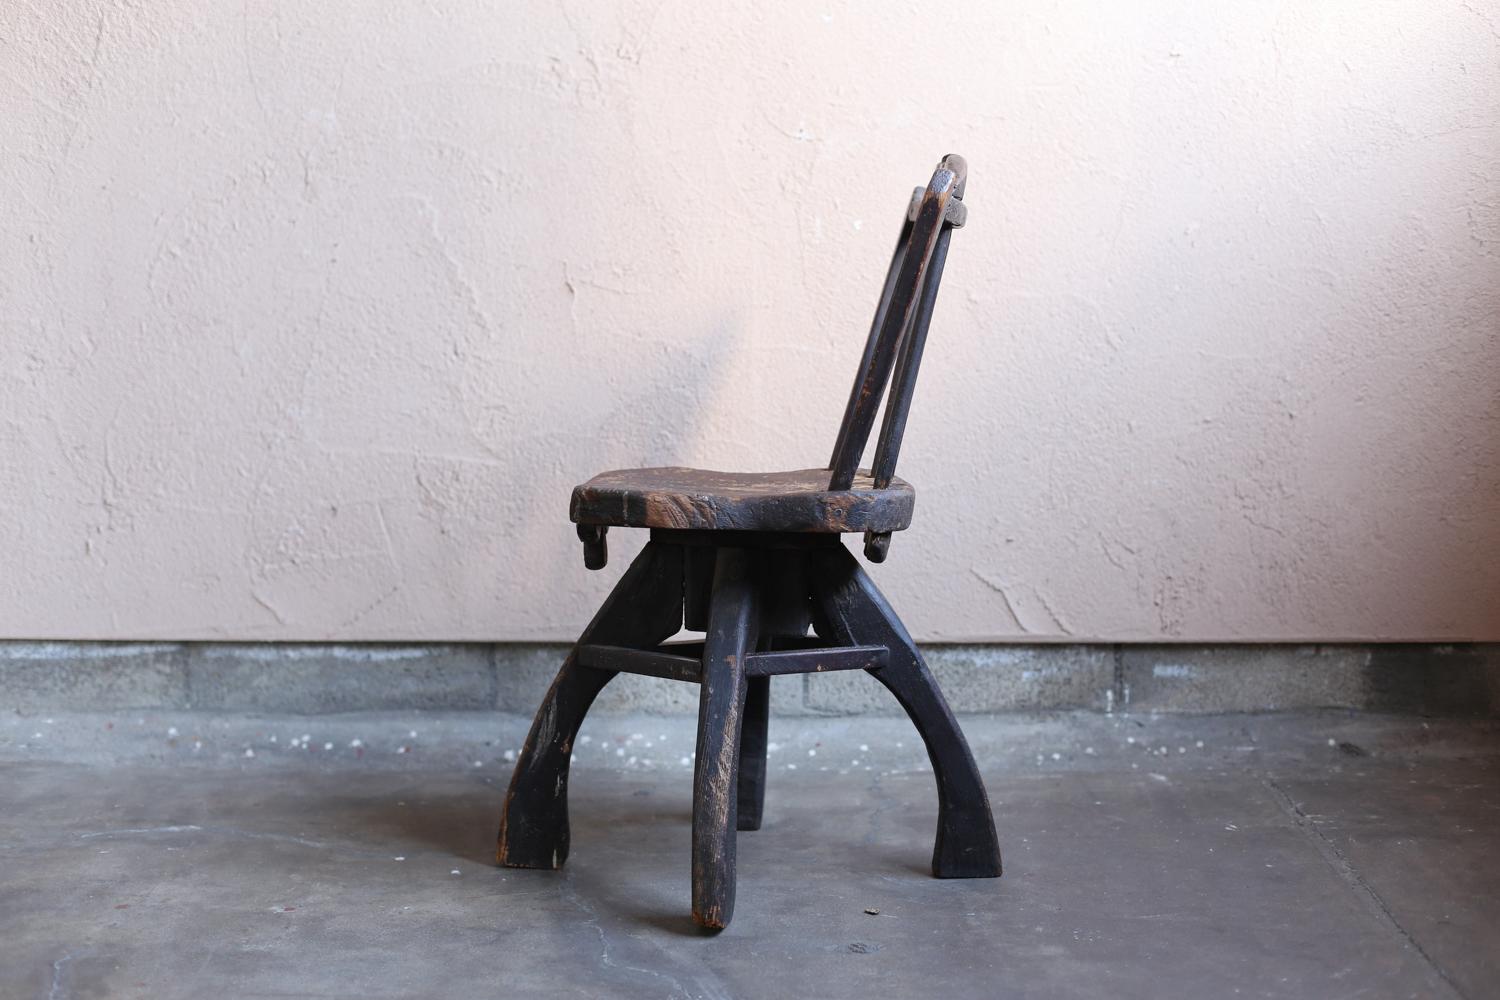 Primitive Wood Chair from Japan 1860s-1900s / Wabi Sabi Wooden Chair Mingei In Good Condition For Sale In Sammu-shi, Chiba